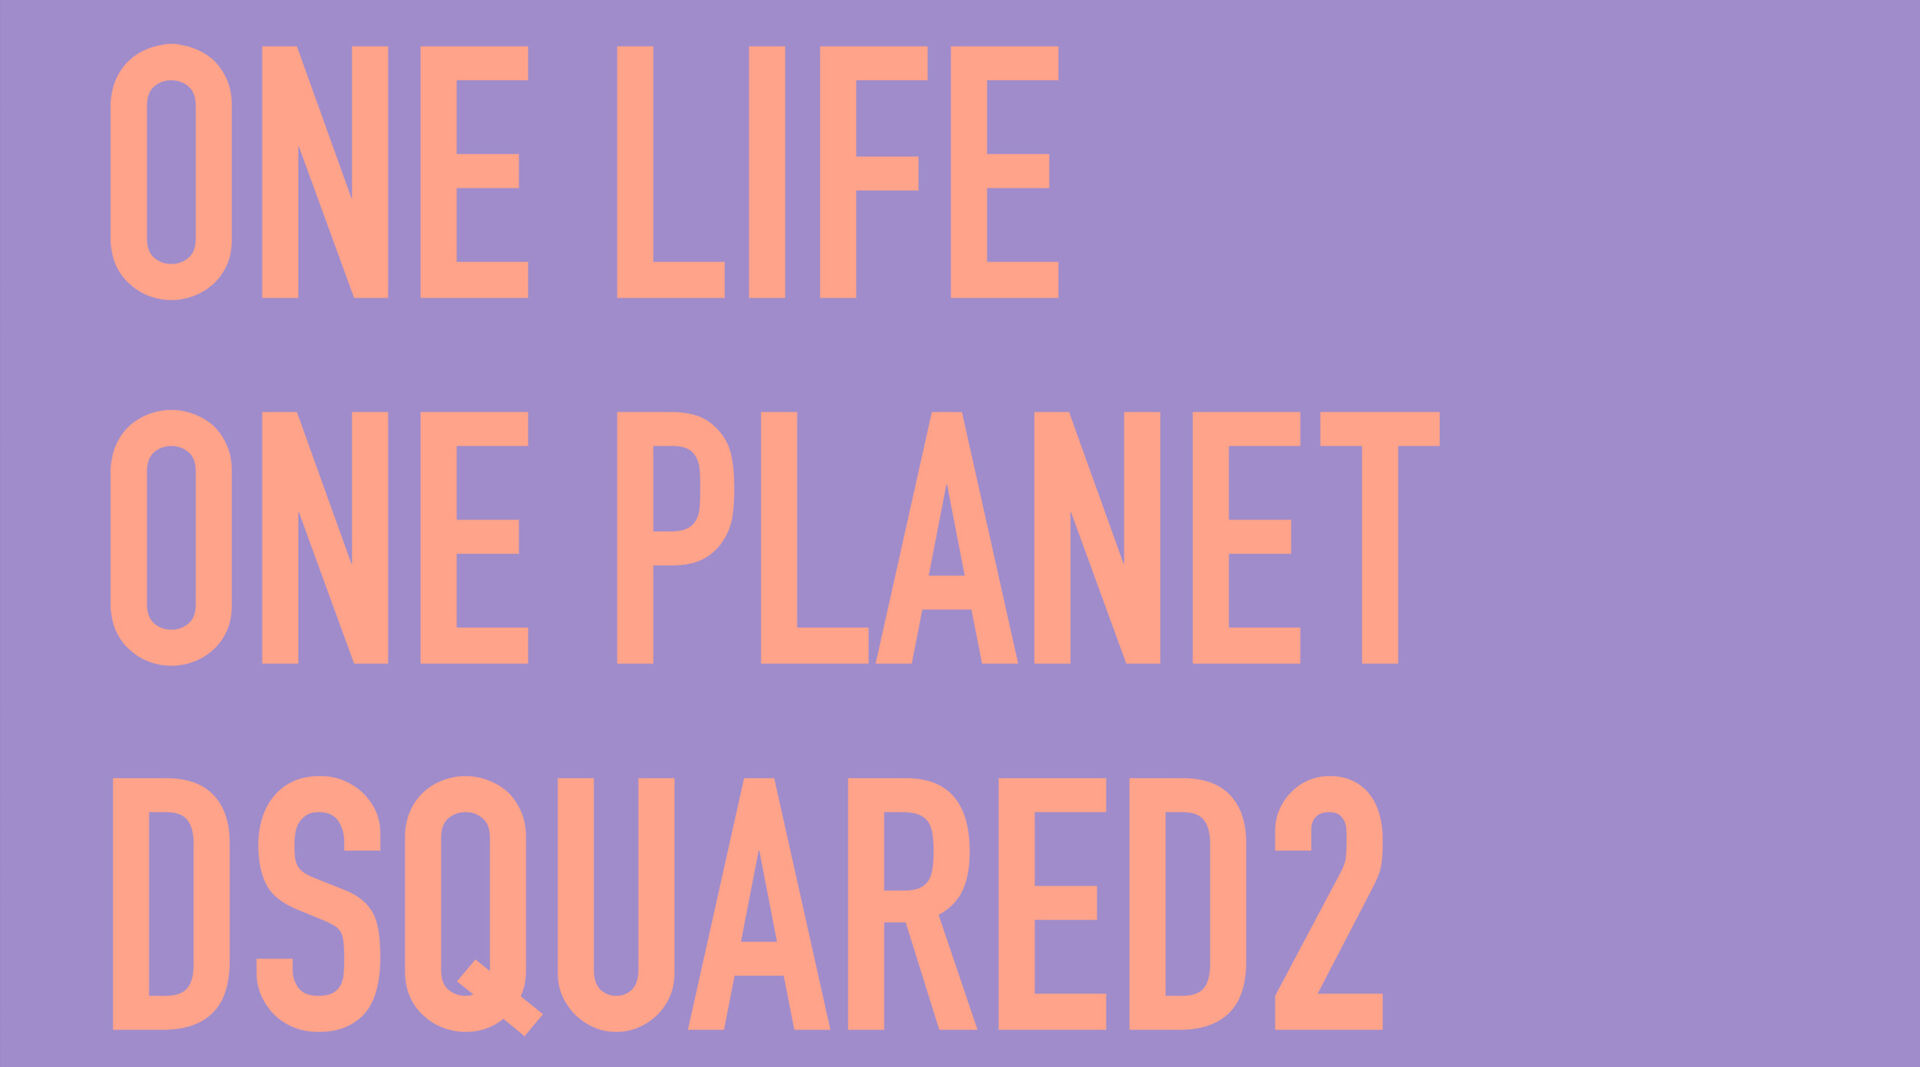 one life one planet header in orange on lilac backround